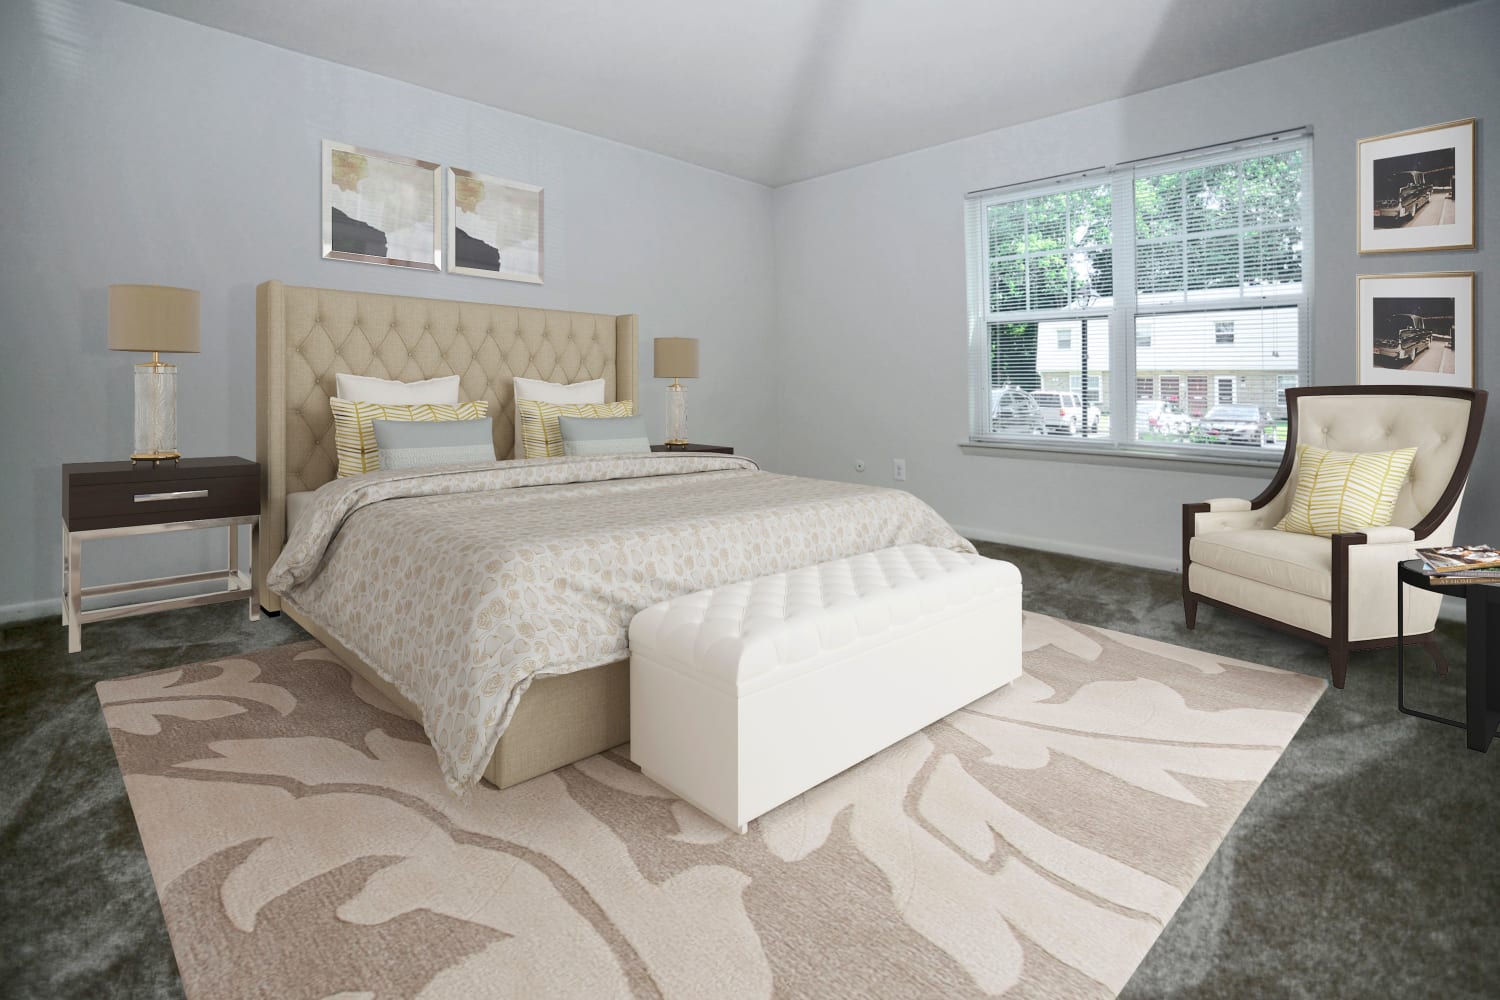 Spacious model master bedroom at The Fairways Apartment Homes in Blackwood, New Jersey